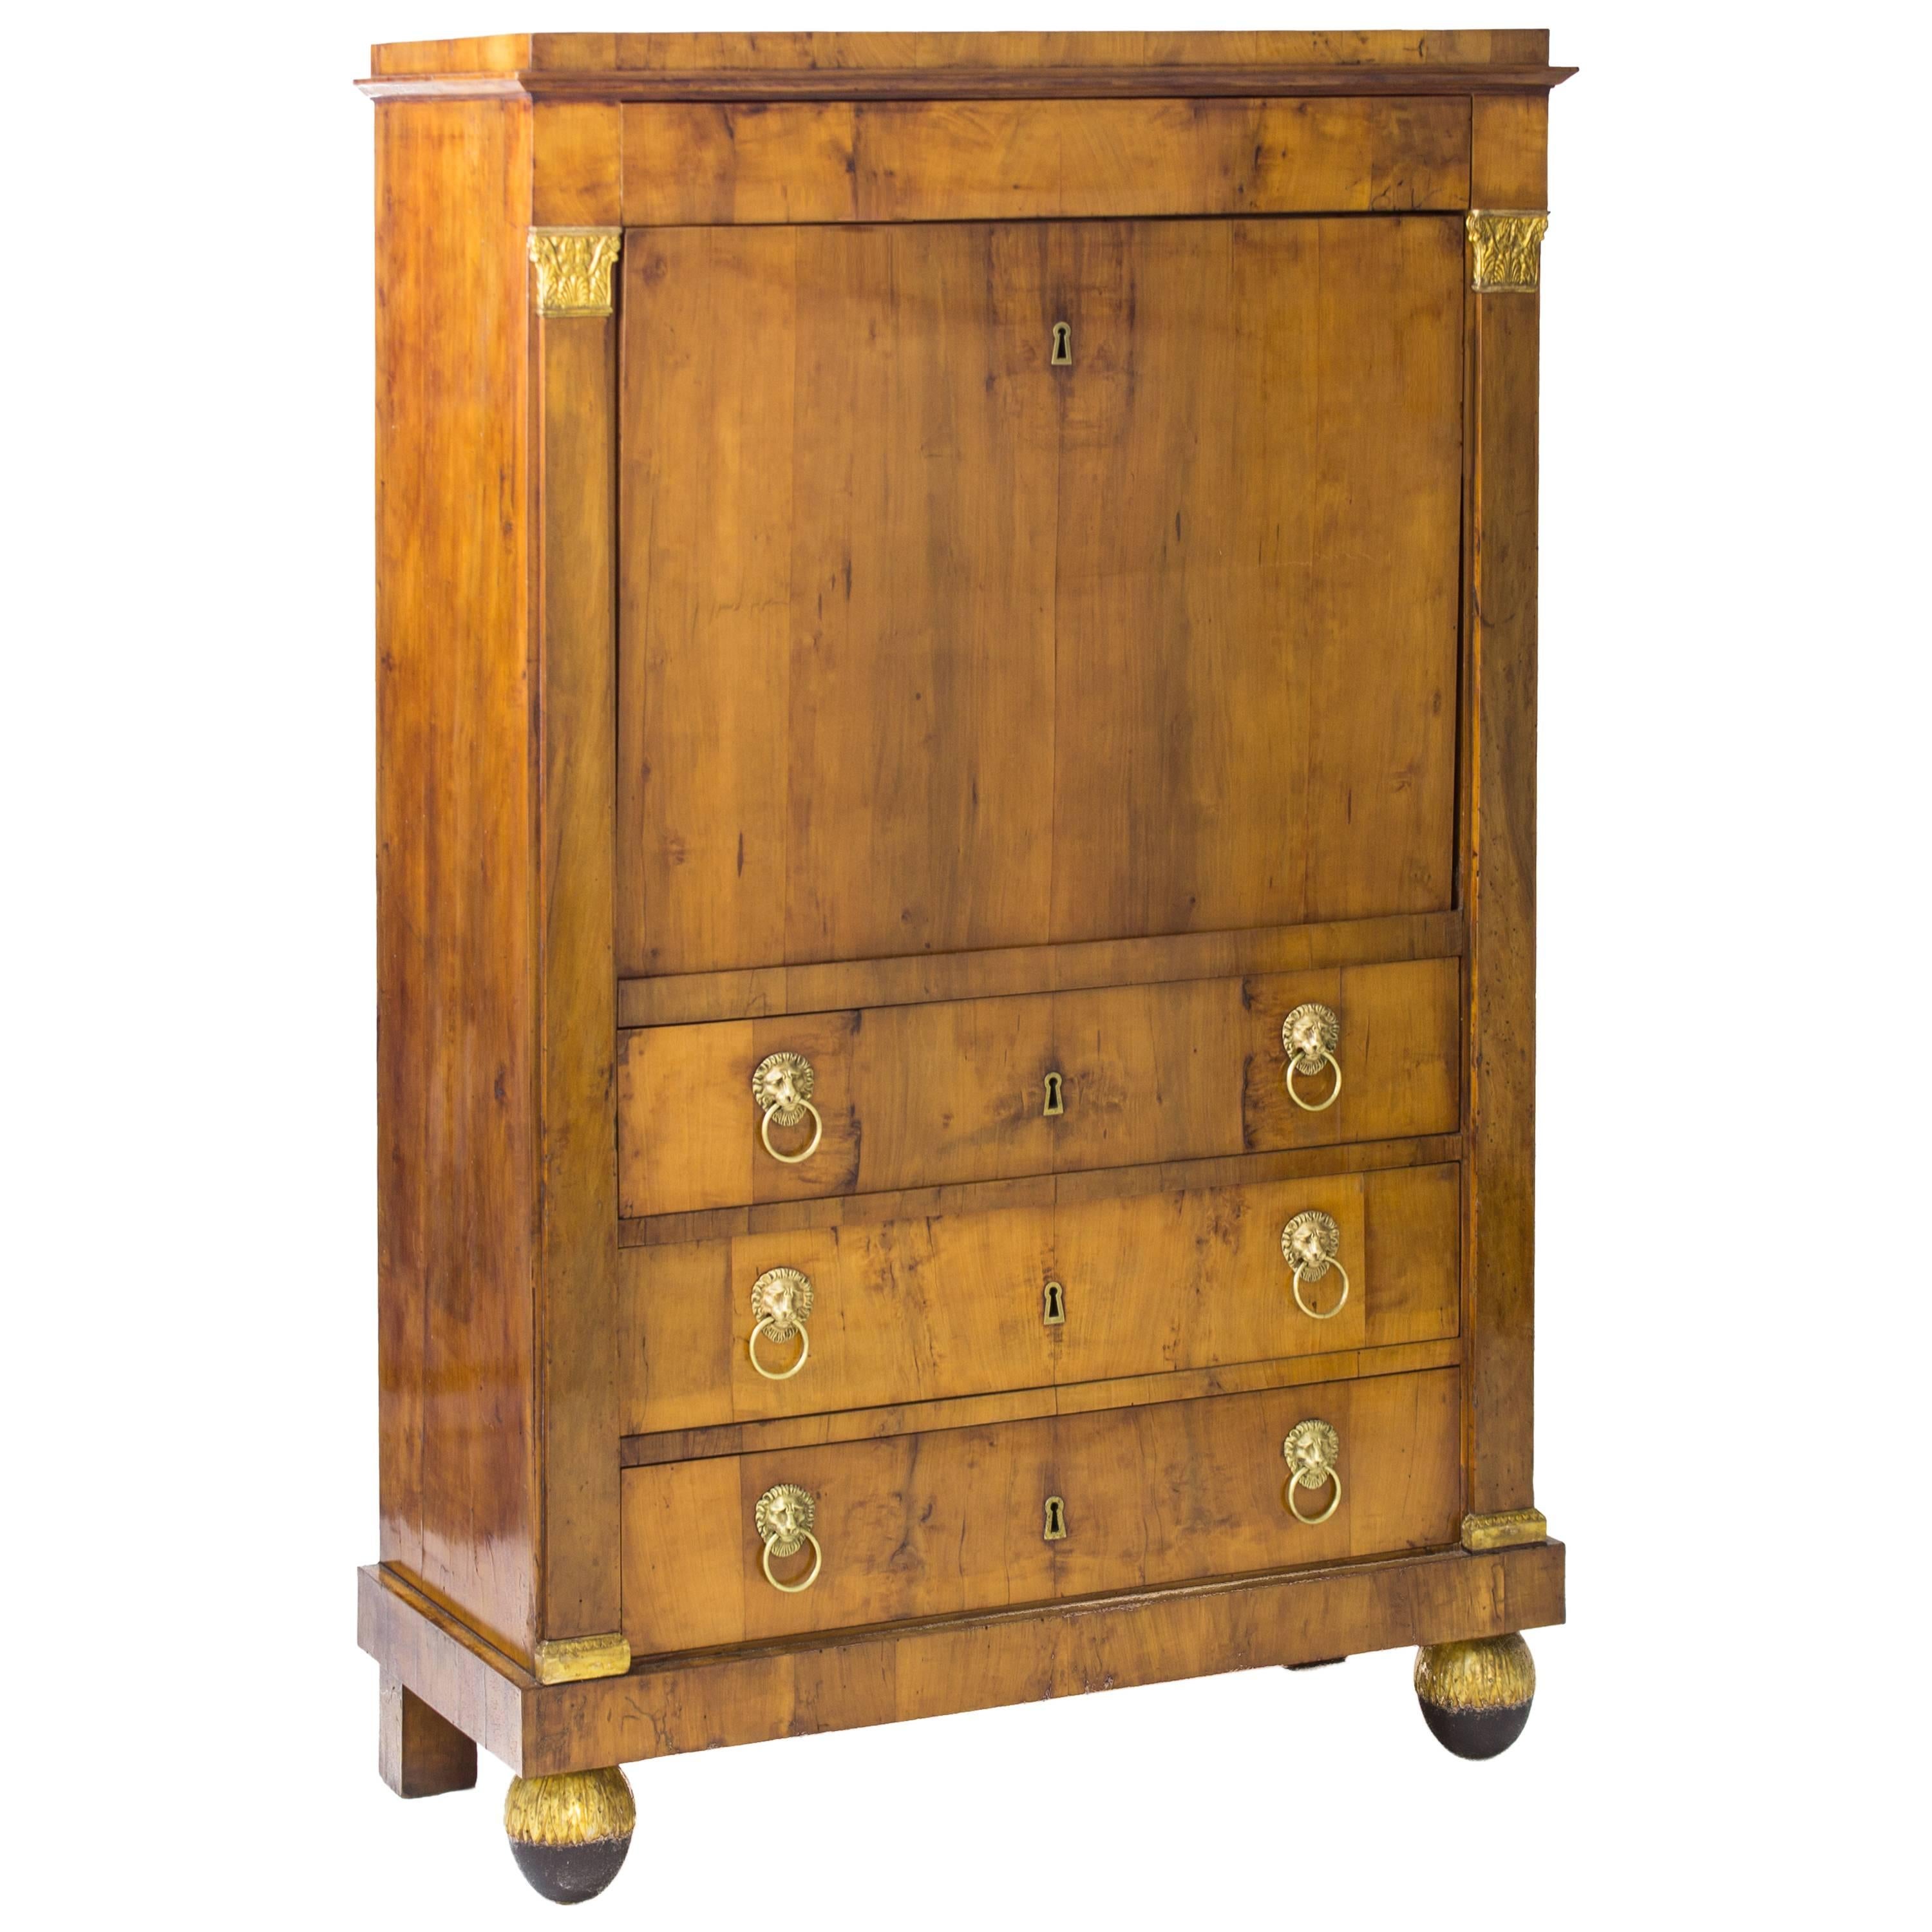 19th Century French Empire Walnut Fall-Front Secretaire For Sale